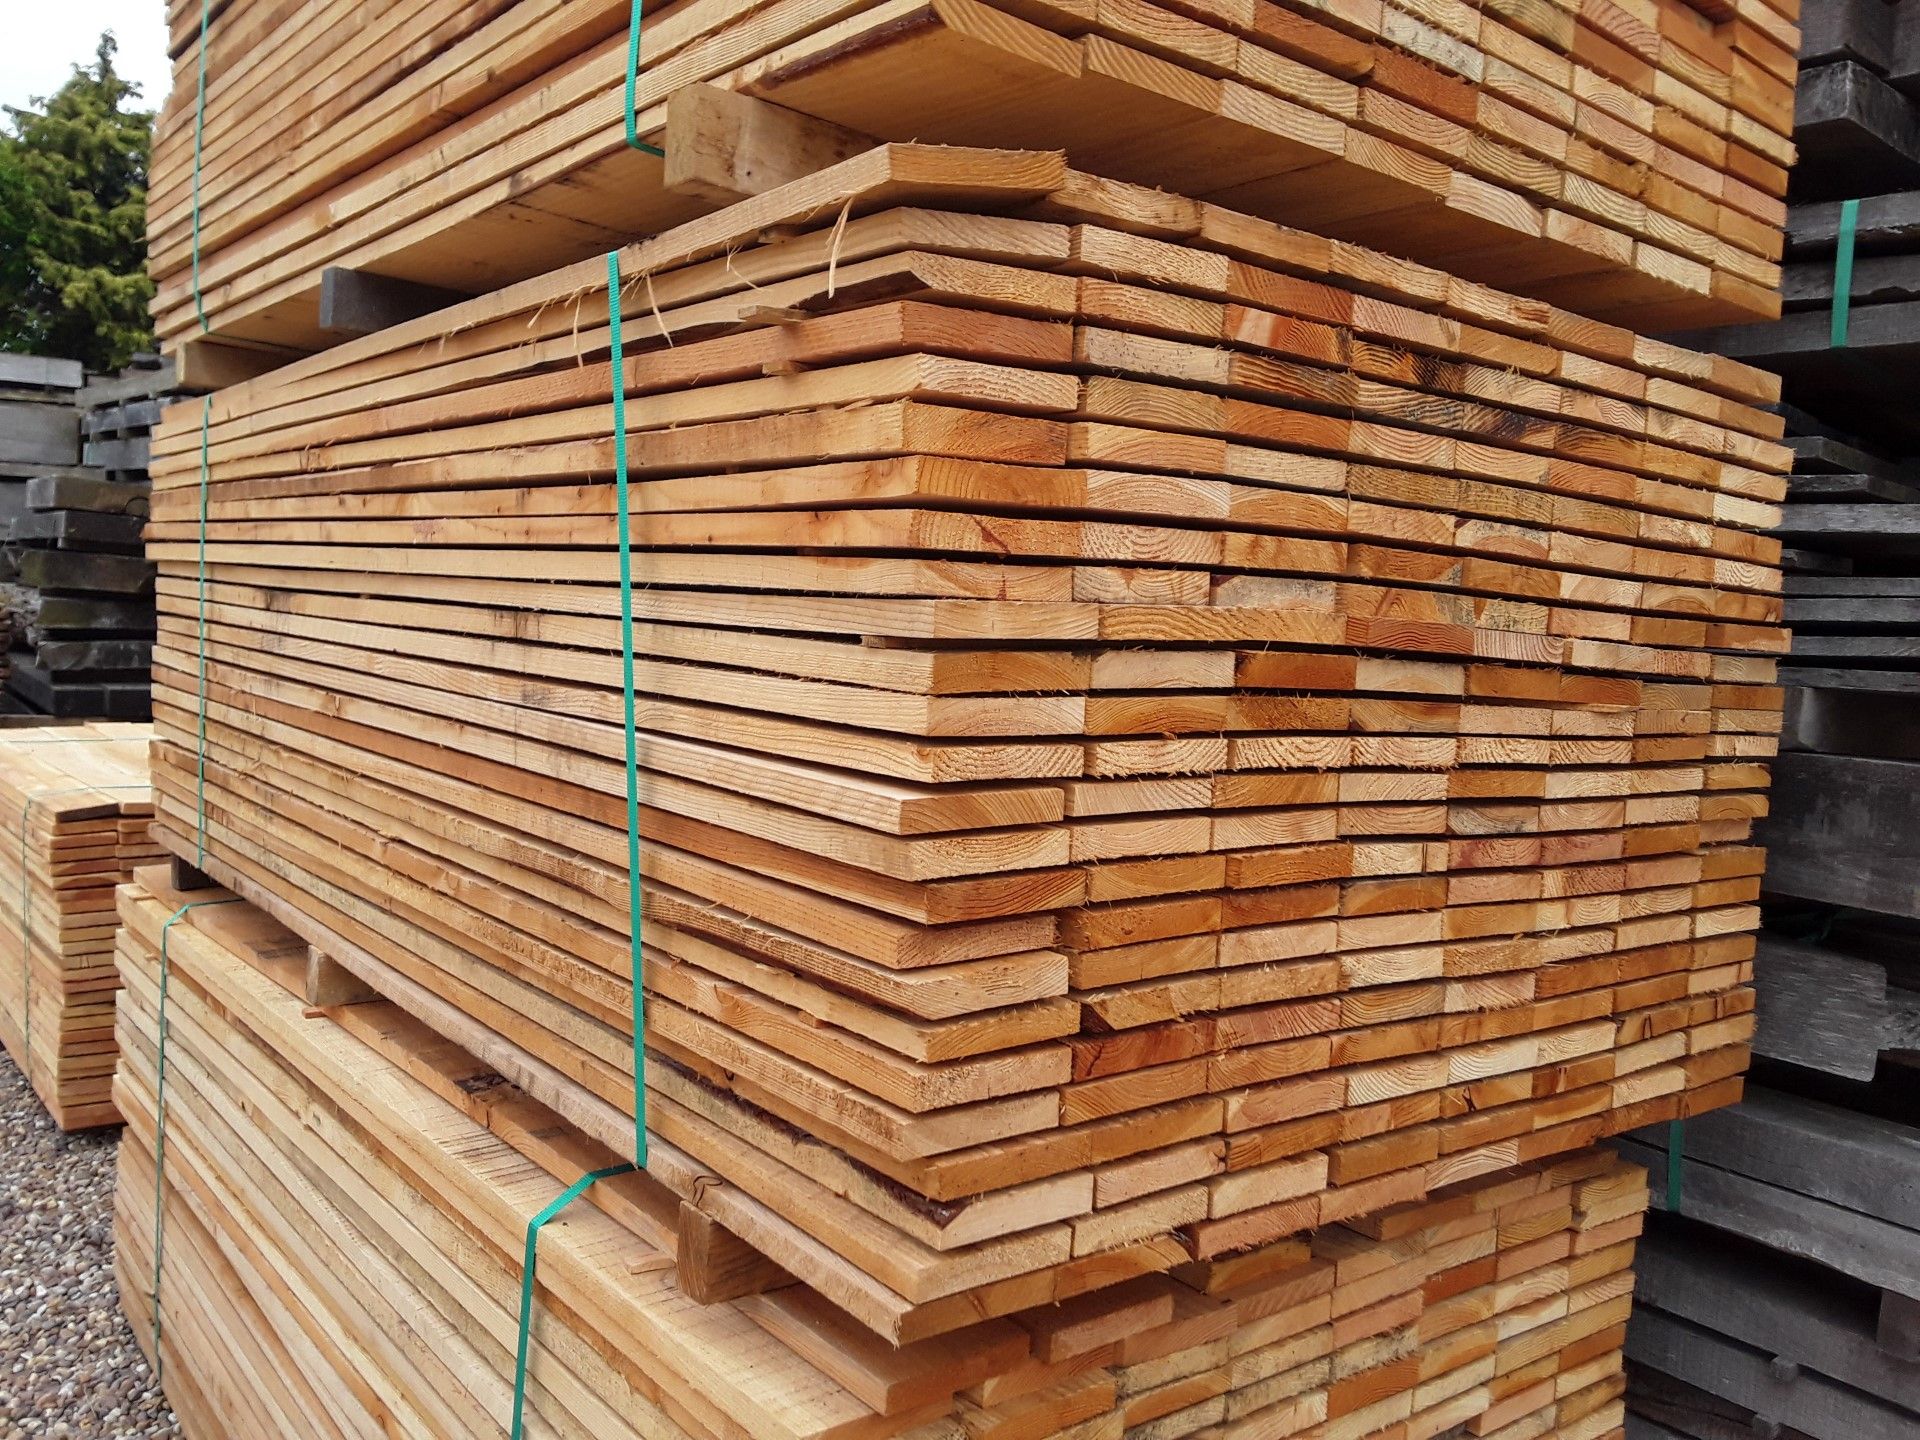 50x Softwood Sawn Timber Mixed Larch / Douglas Fir Boards - Image 3 of 6